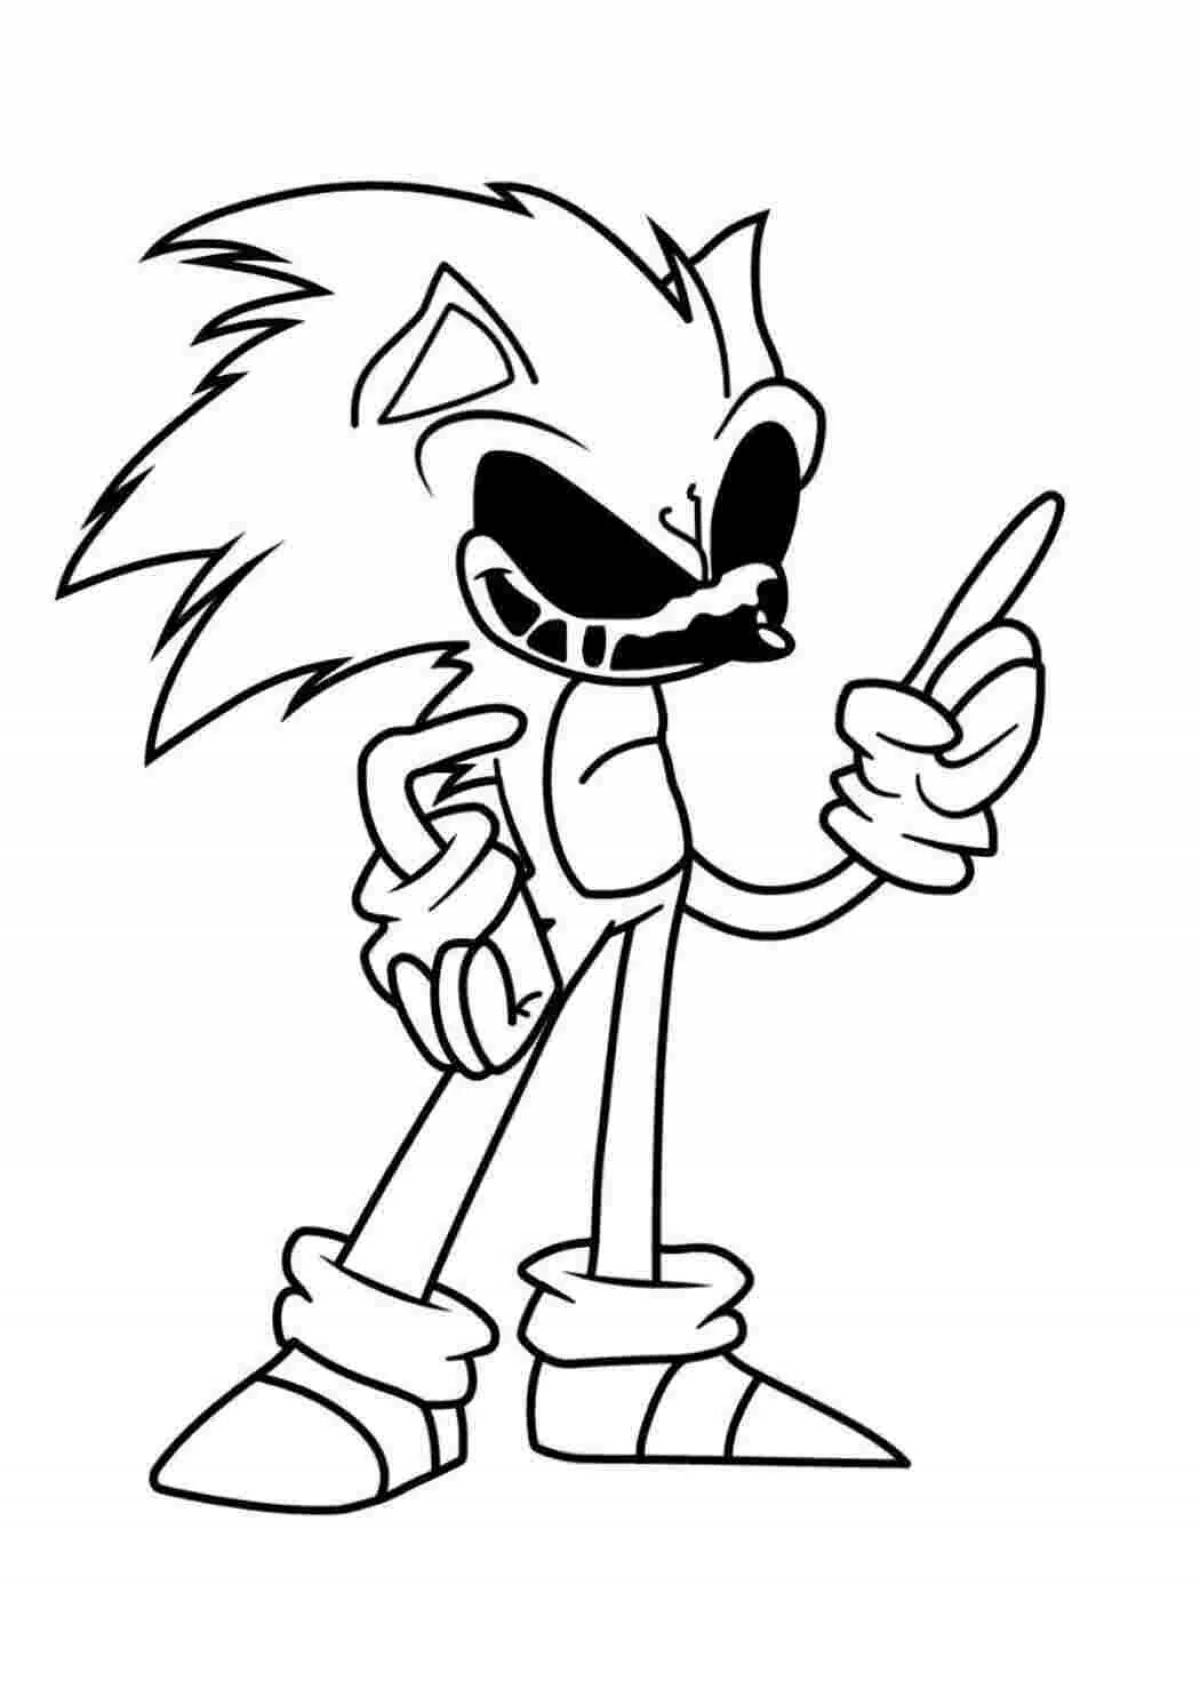 Violent sonic iron coloring book